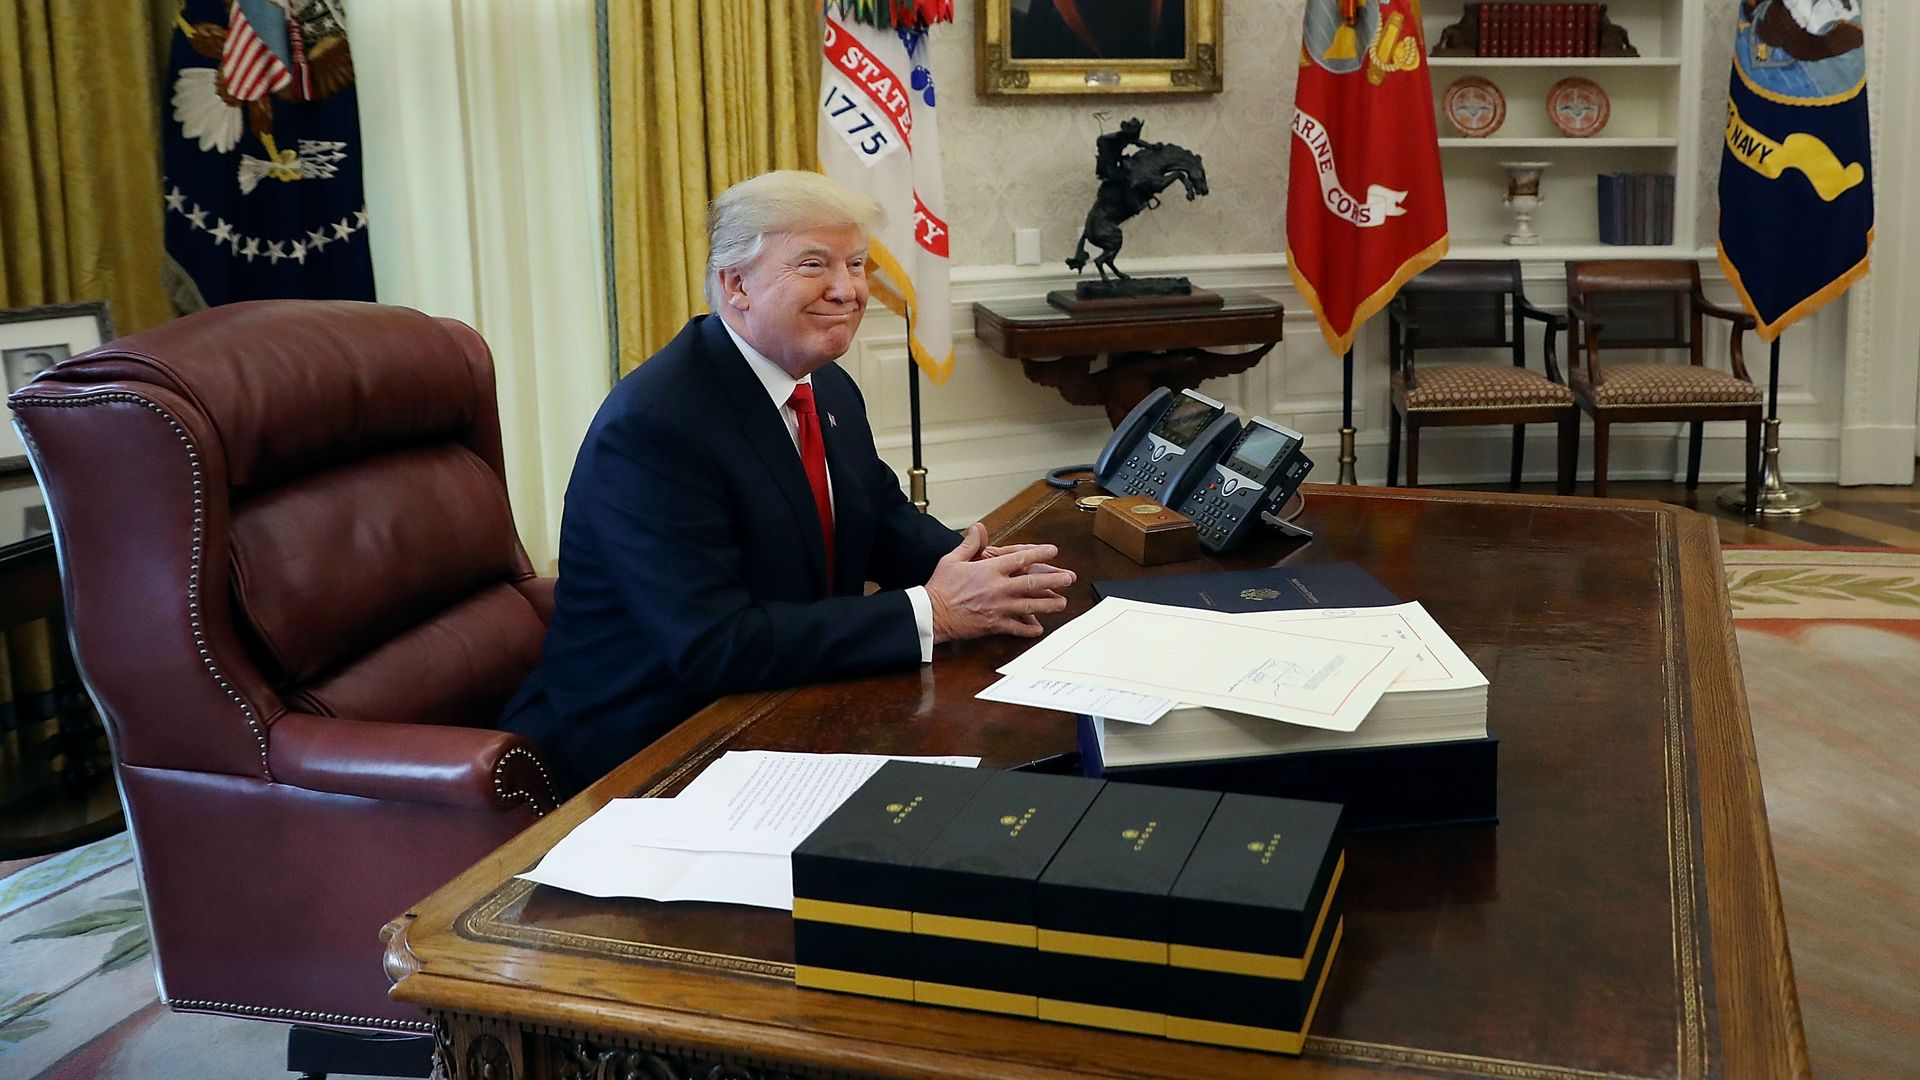 Trump smiles in the Oval Office